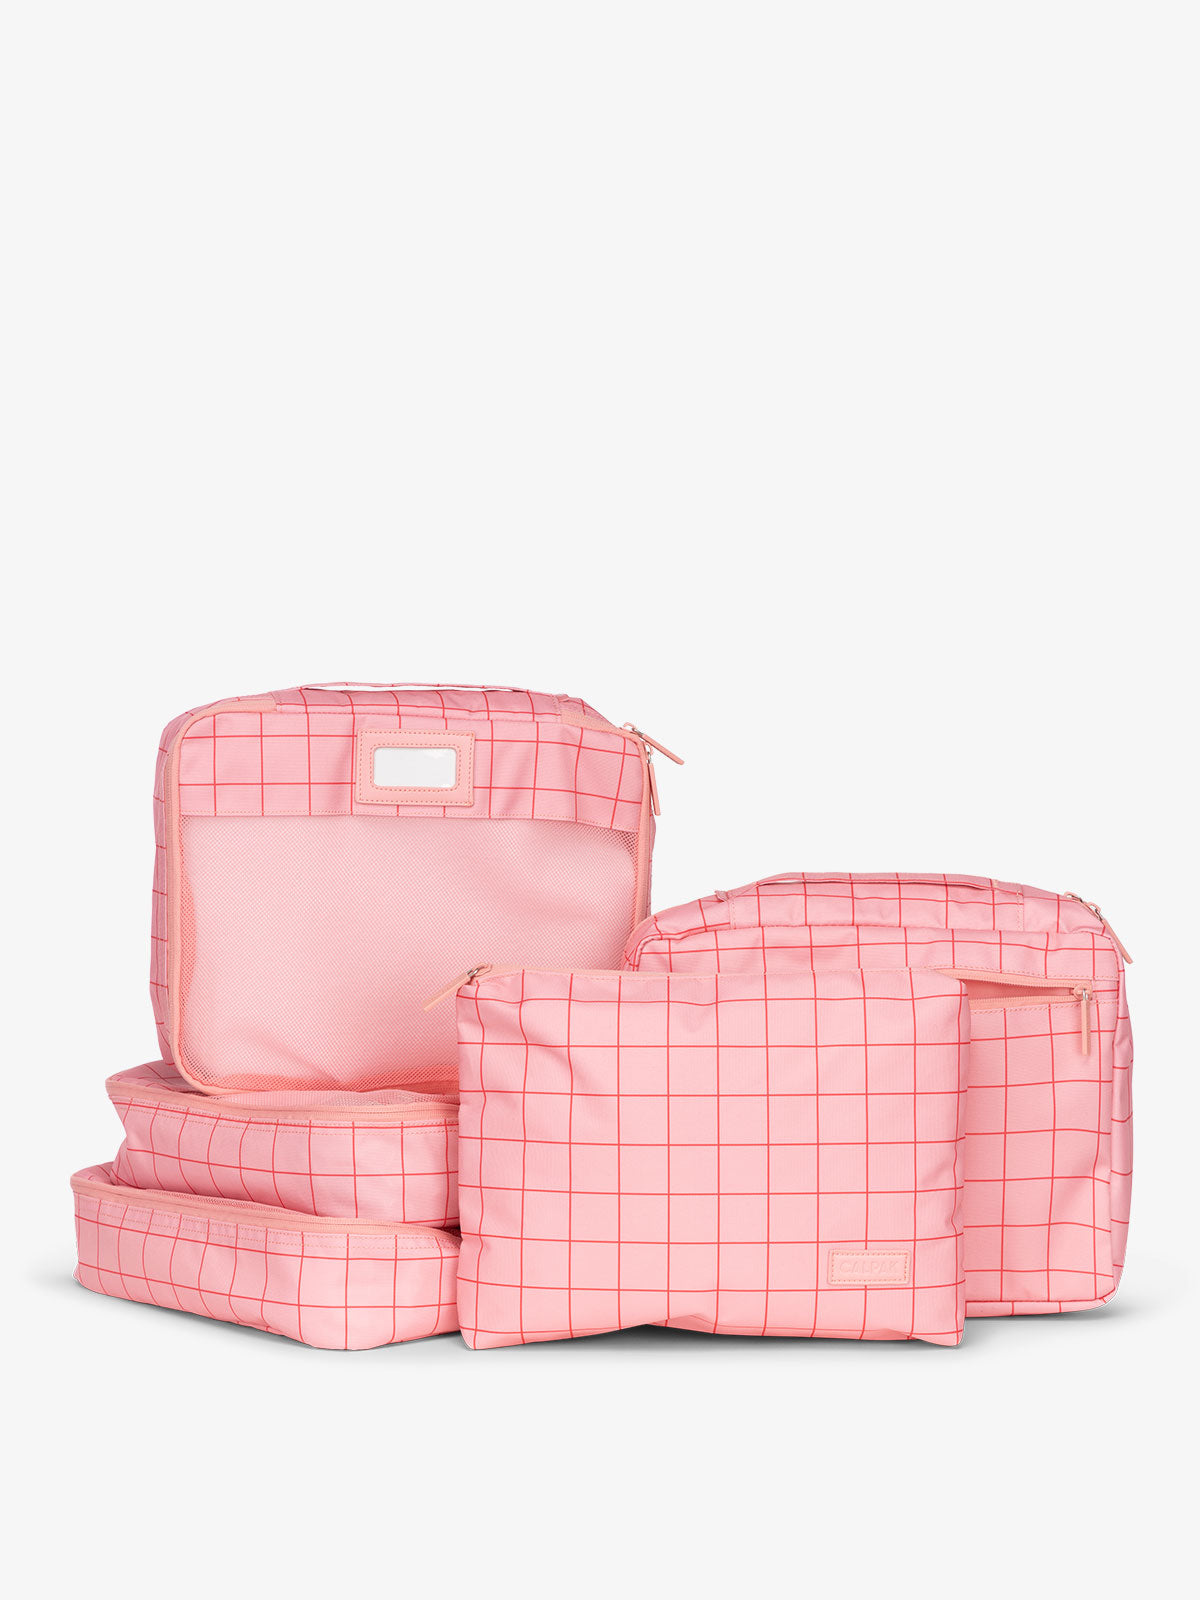 CALPAK 5 piece set packing cubes for travel with labels and top handles in pink grid